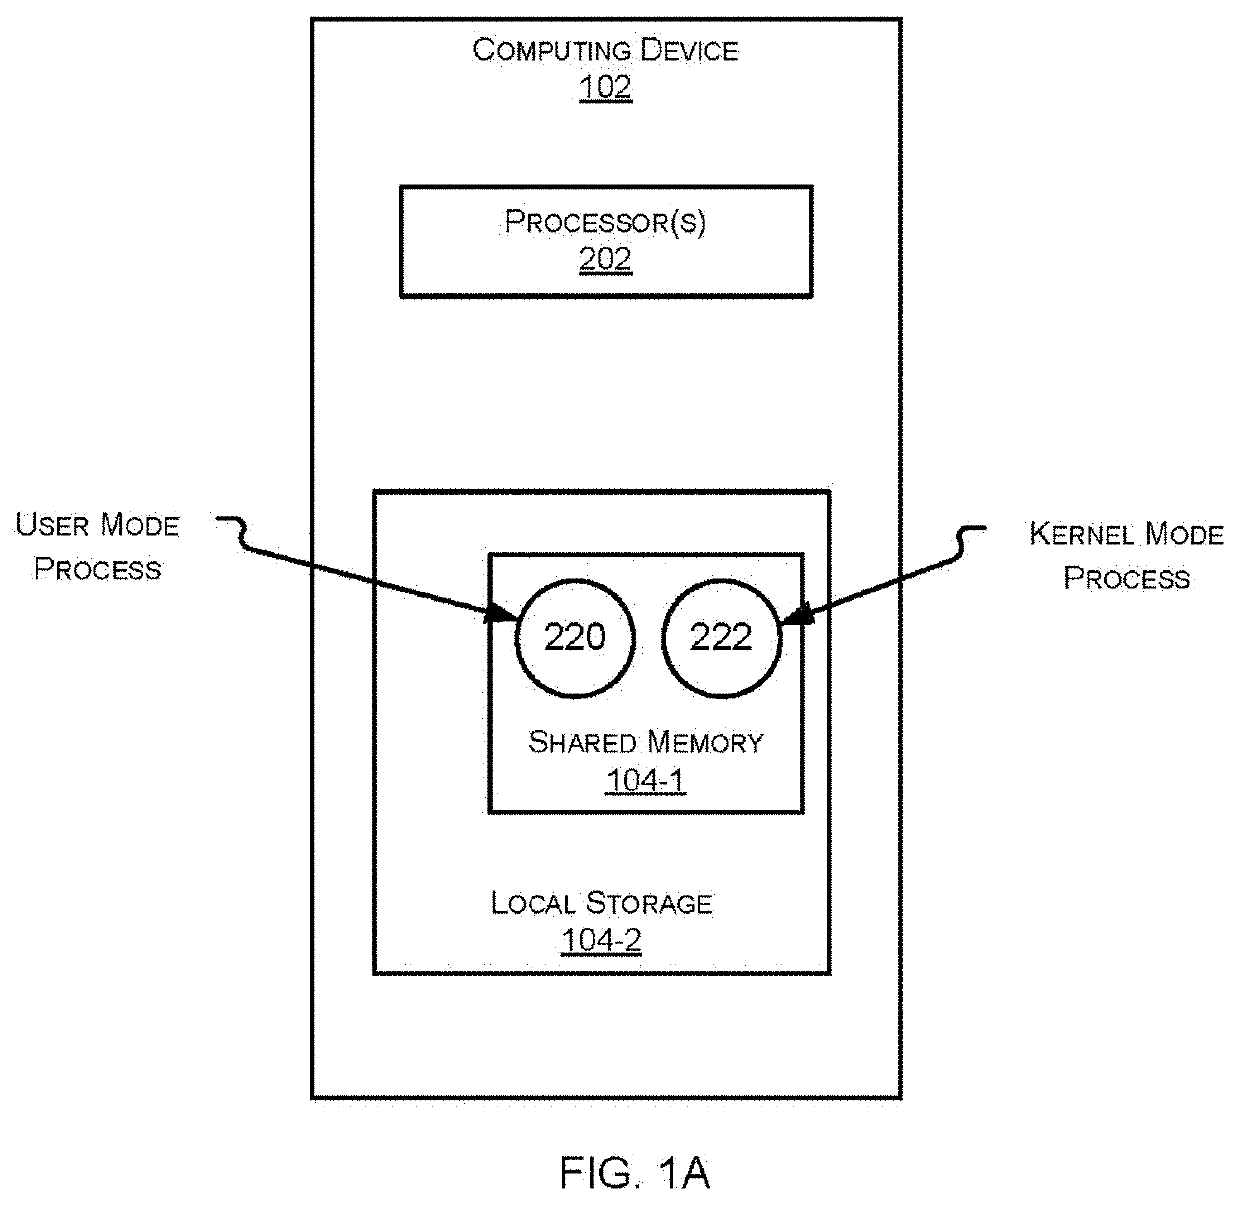 Providing a secure communication channel between kernel and user mode components